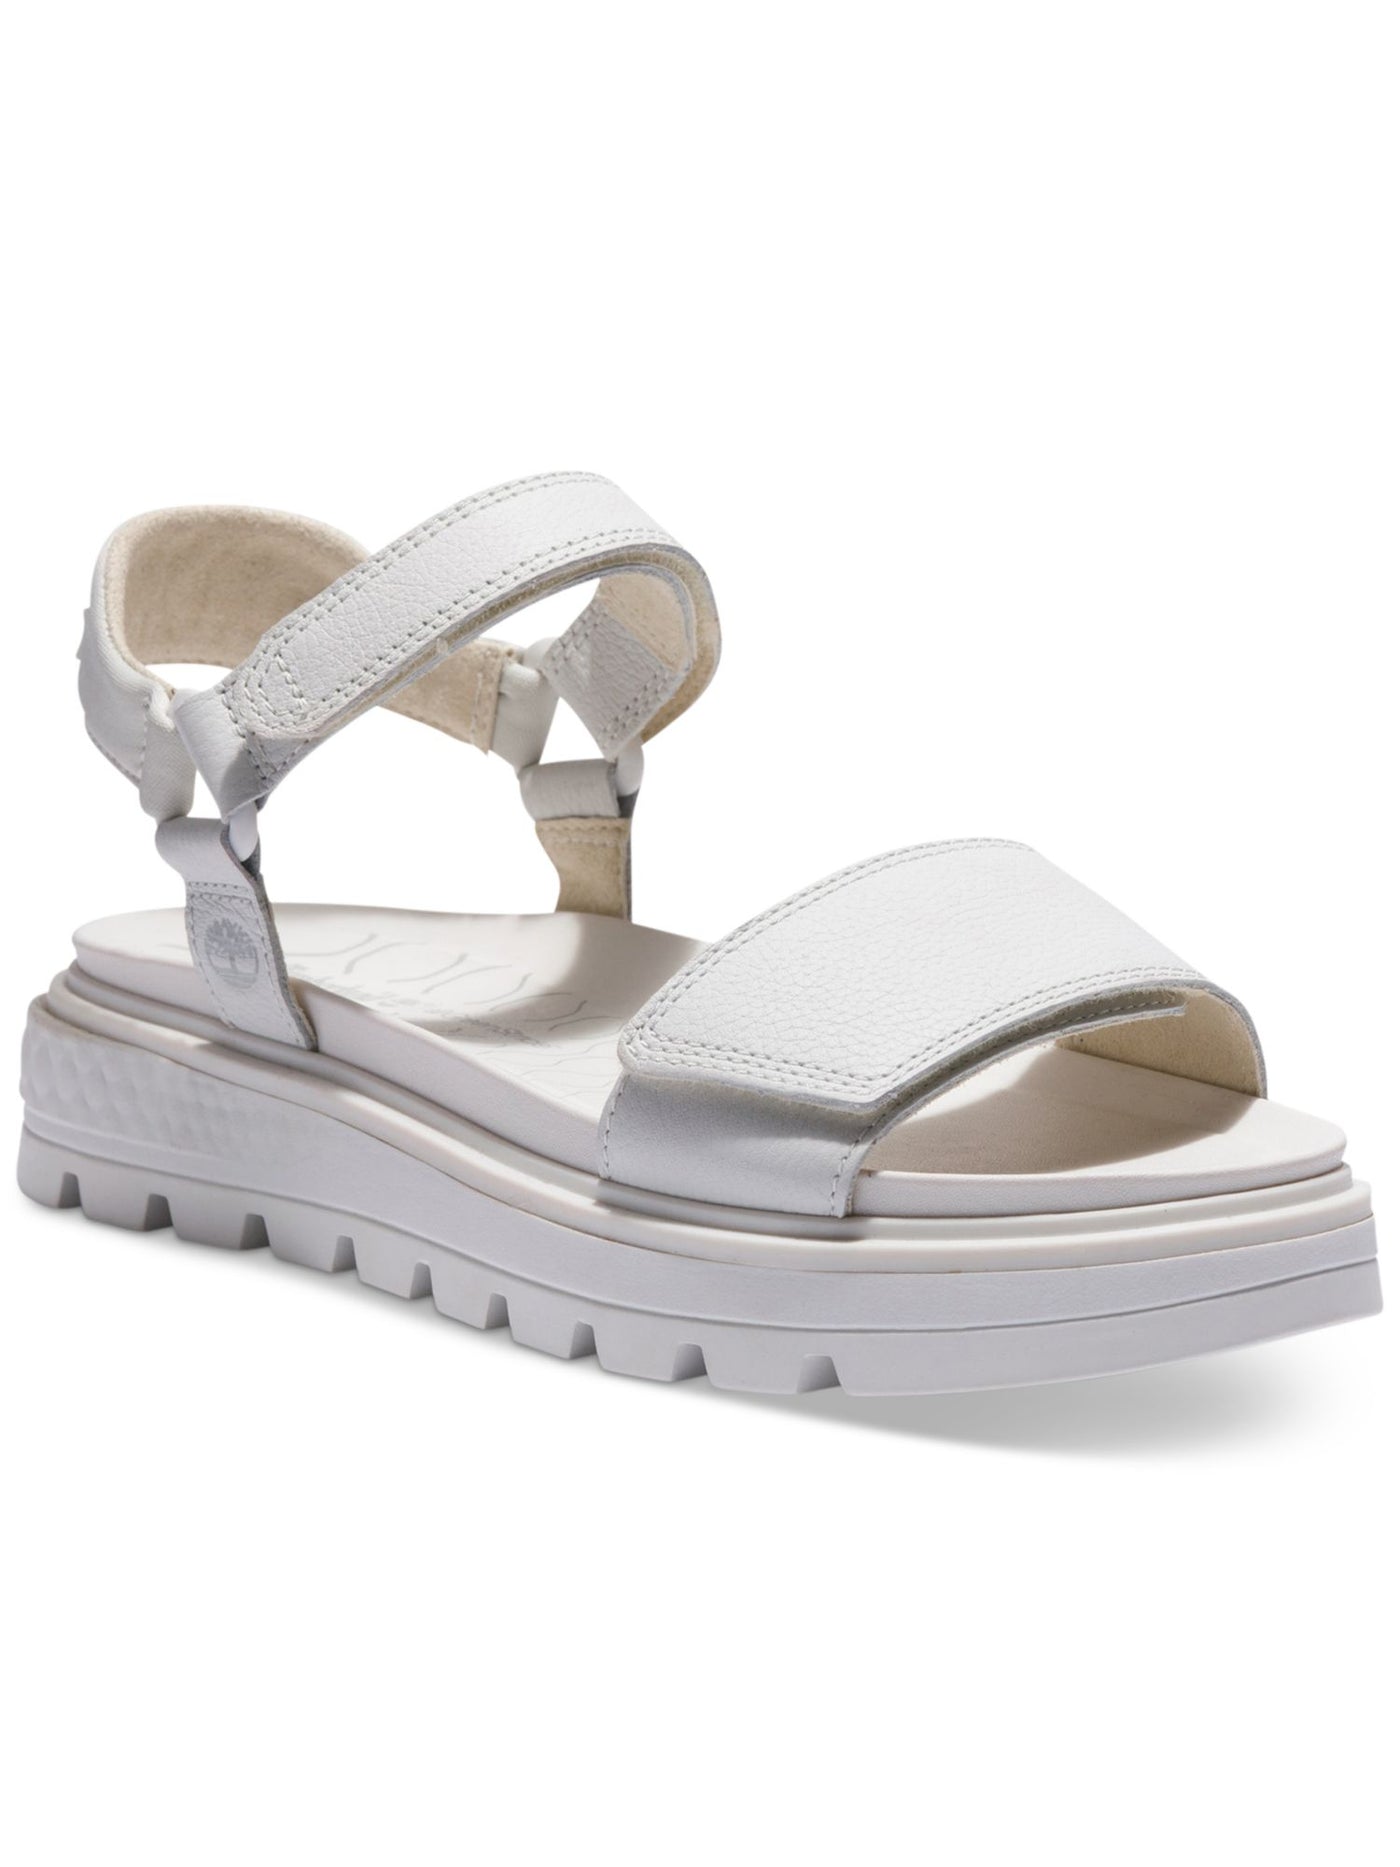 TIMBERLAND Womens White Comfort Ankle Strap Ray City Round Toe Wedge Leather Sandals Shoes 8.5